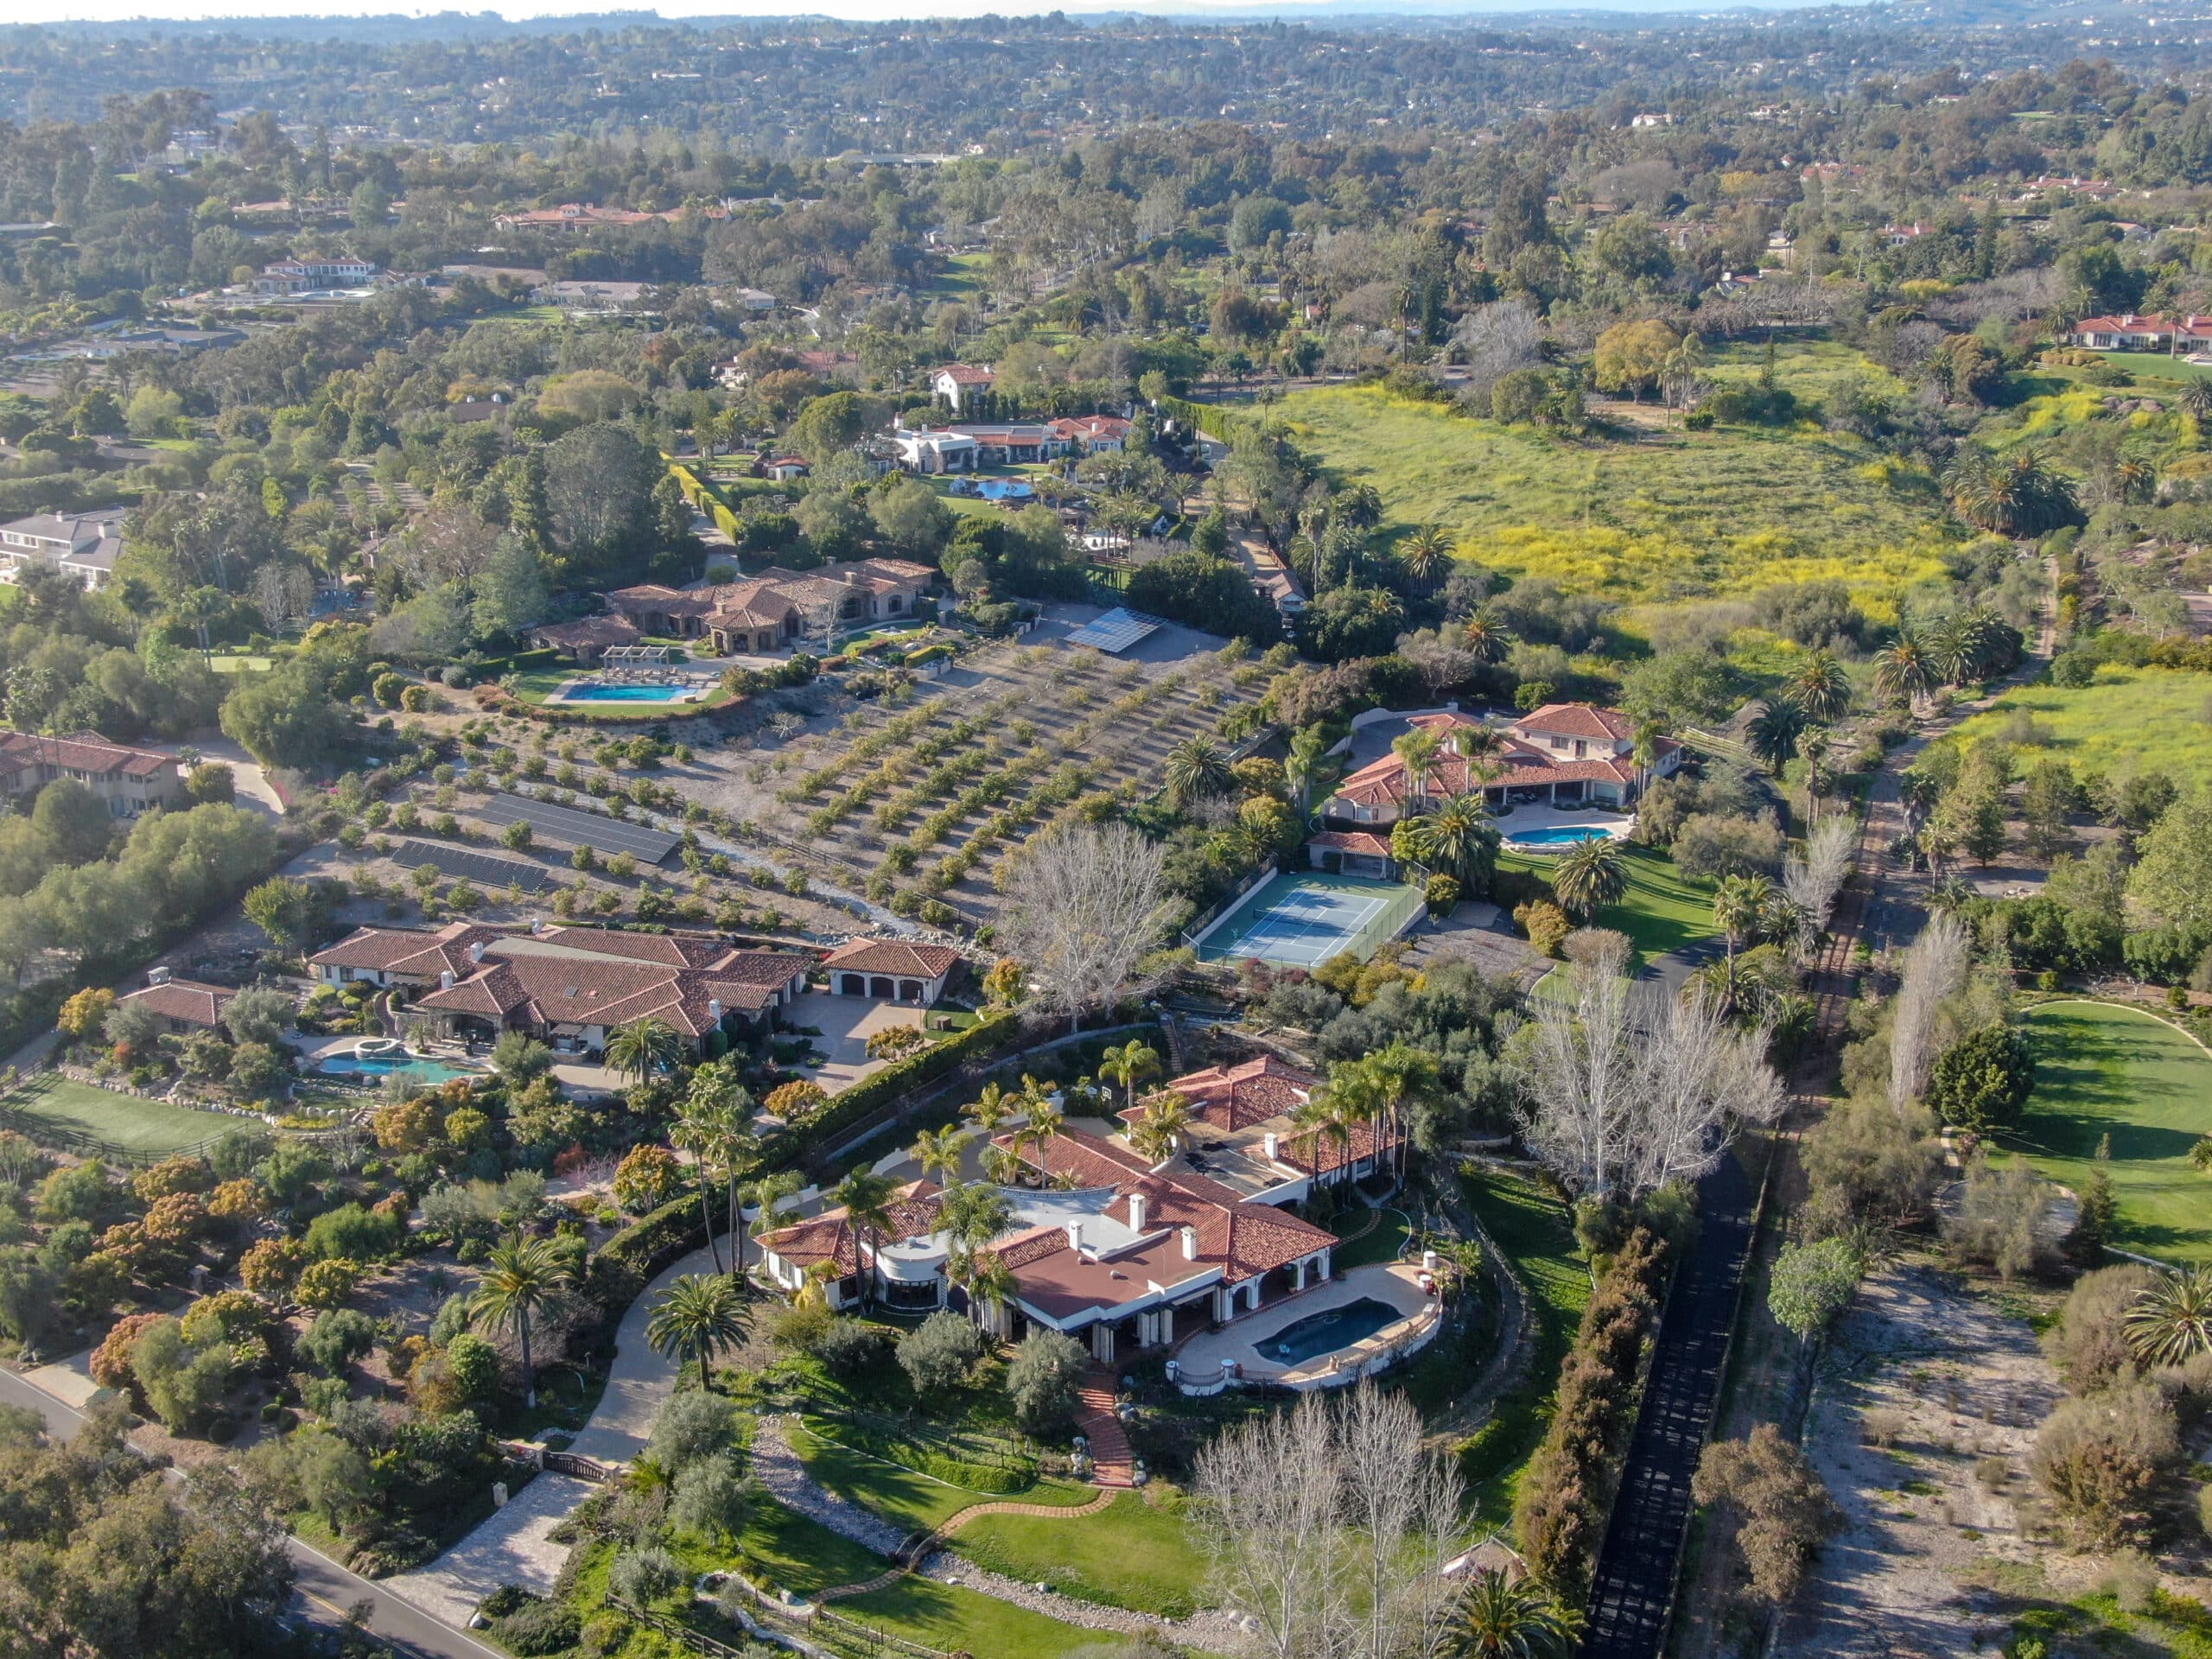 Aerial view of luxurious Rancho Santa Fe homes surrounded by lush greenery, highlighting the upscale residential area in California.